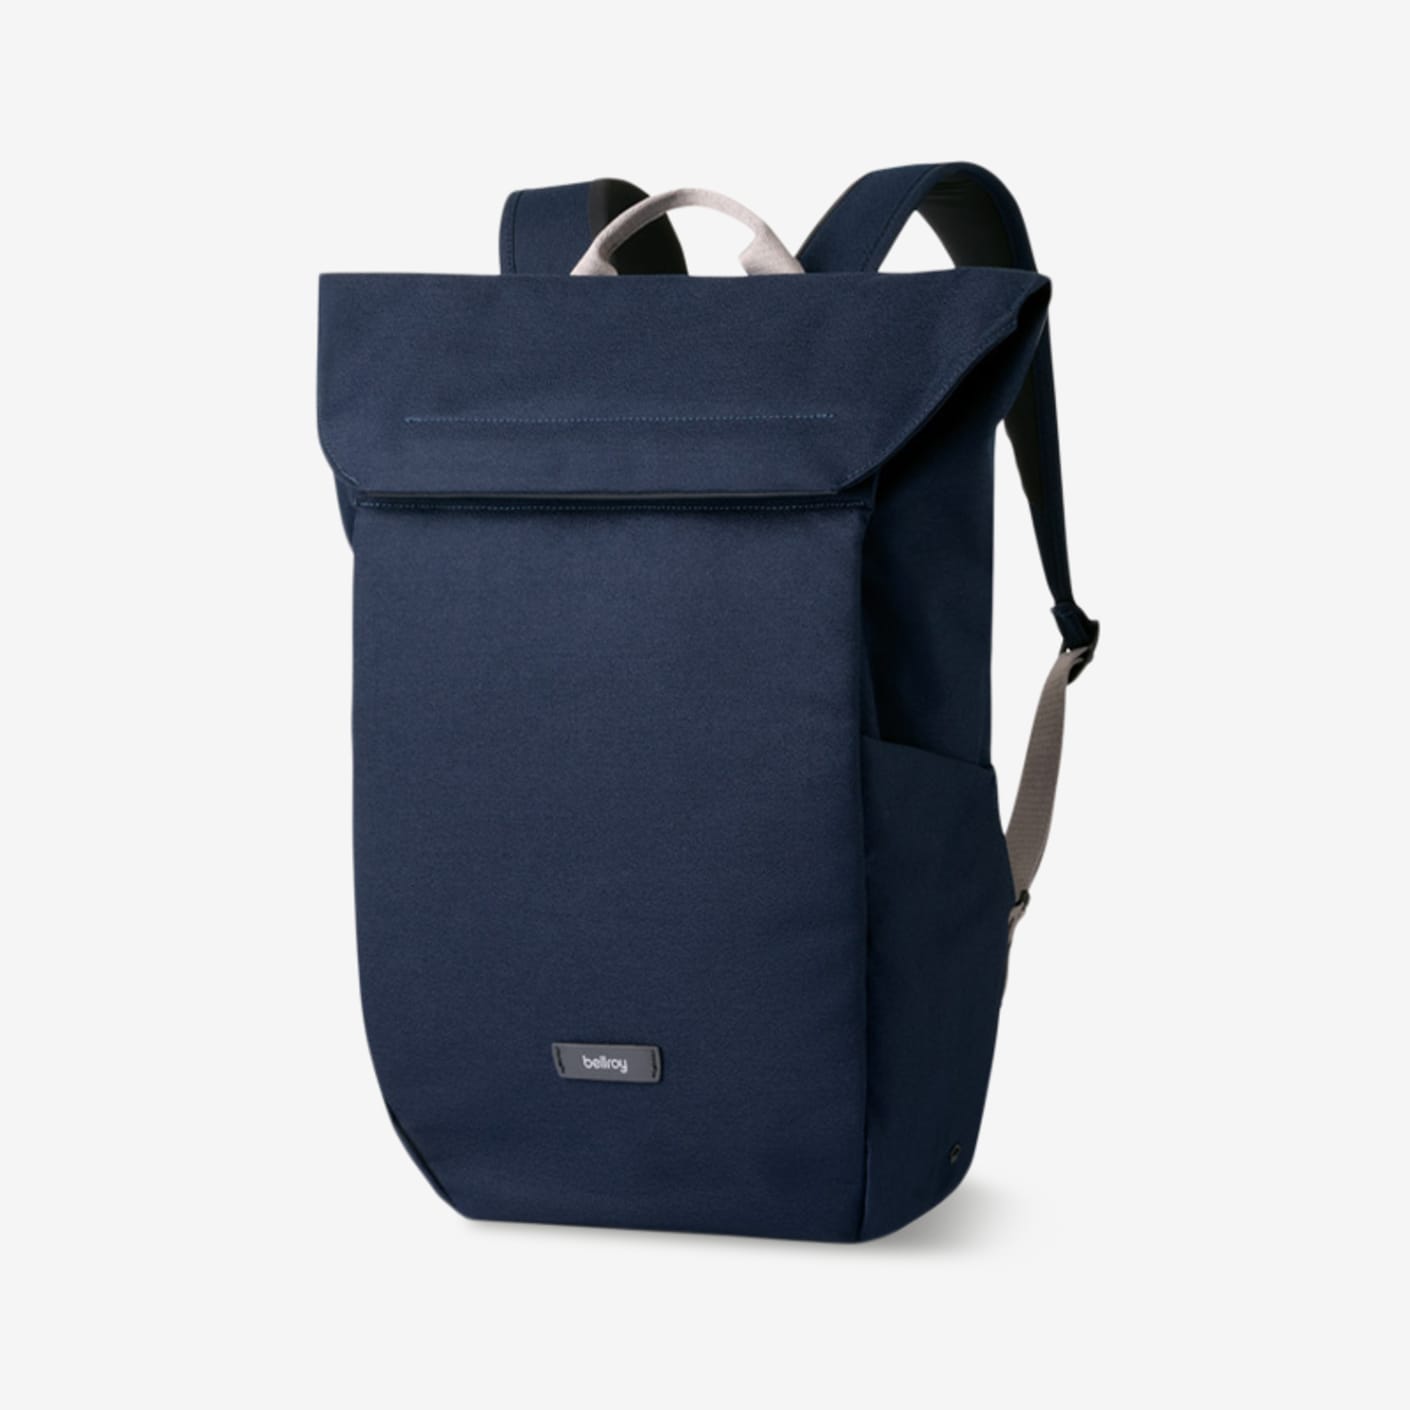 Bellroy Melbourne Backpack Compact | Bespoke Post